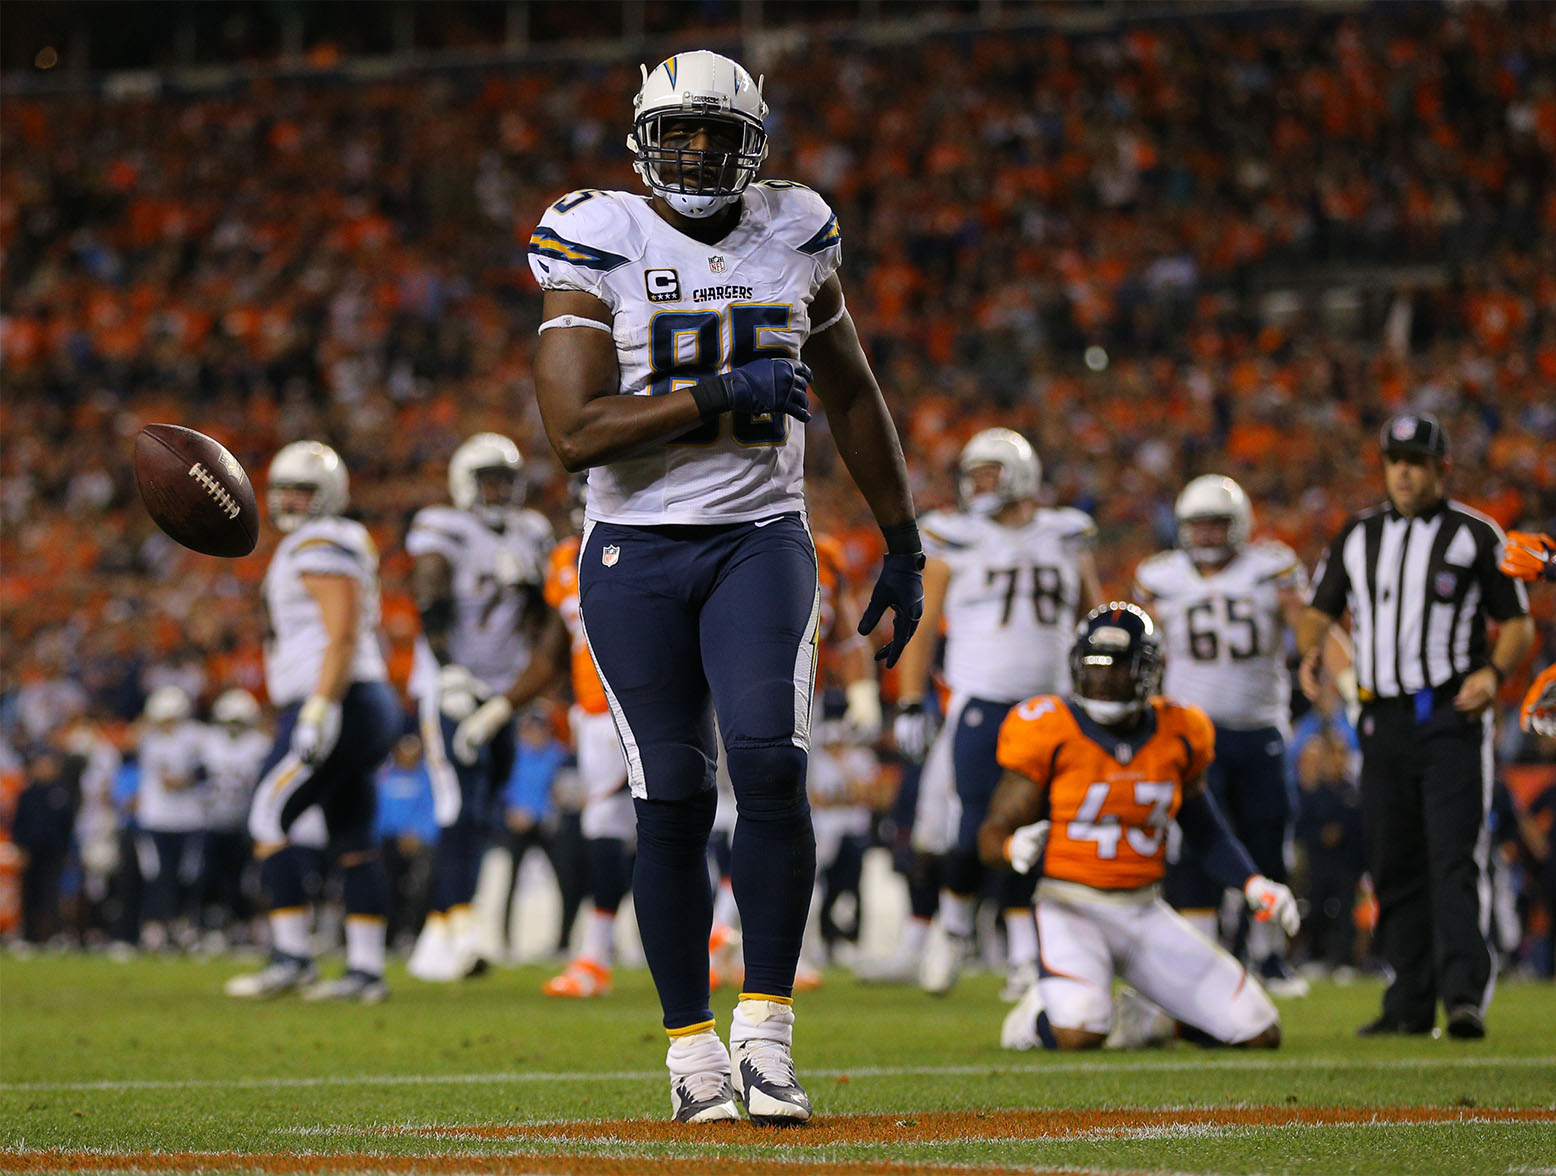 DENVER, CO - OCTOBER 23:  Tight end Antonio Gates #85 of the San Diego Chargers tosses the ball after a 4 yard touchdown reception in the third quarter of a game against the Denver Broncos at Sports Authority Field at Mile High on October 23, 2014 in Denver, Colorado.  (Photo by Justin Edmonds/Getty Images)